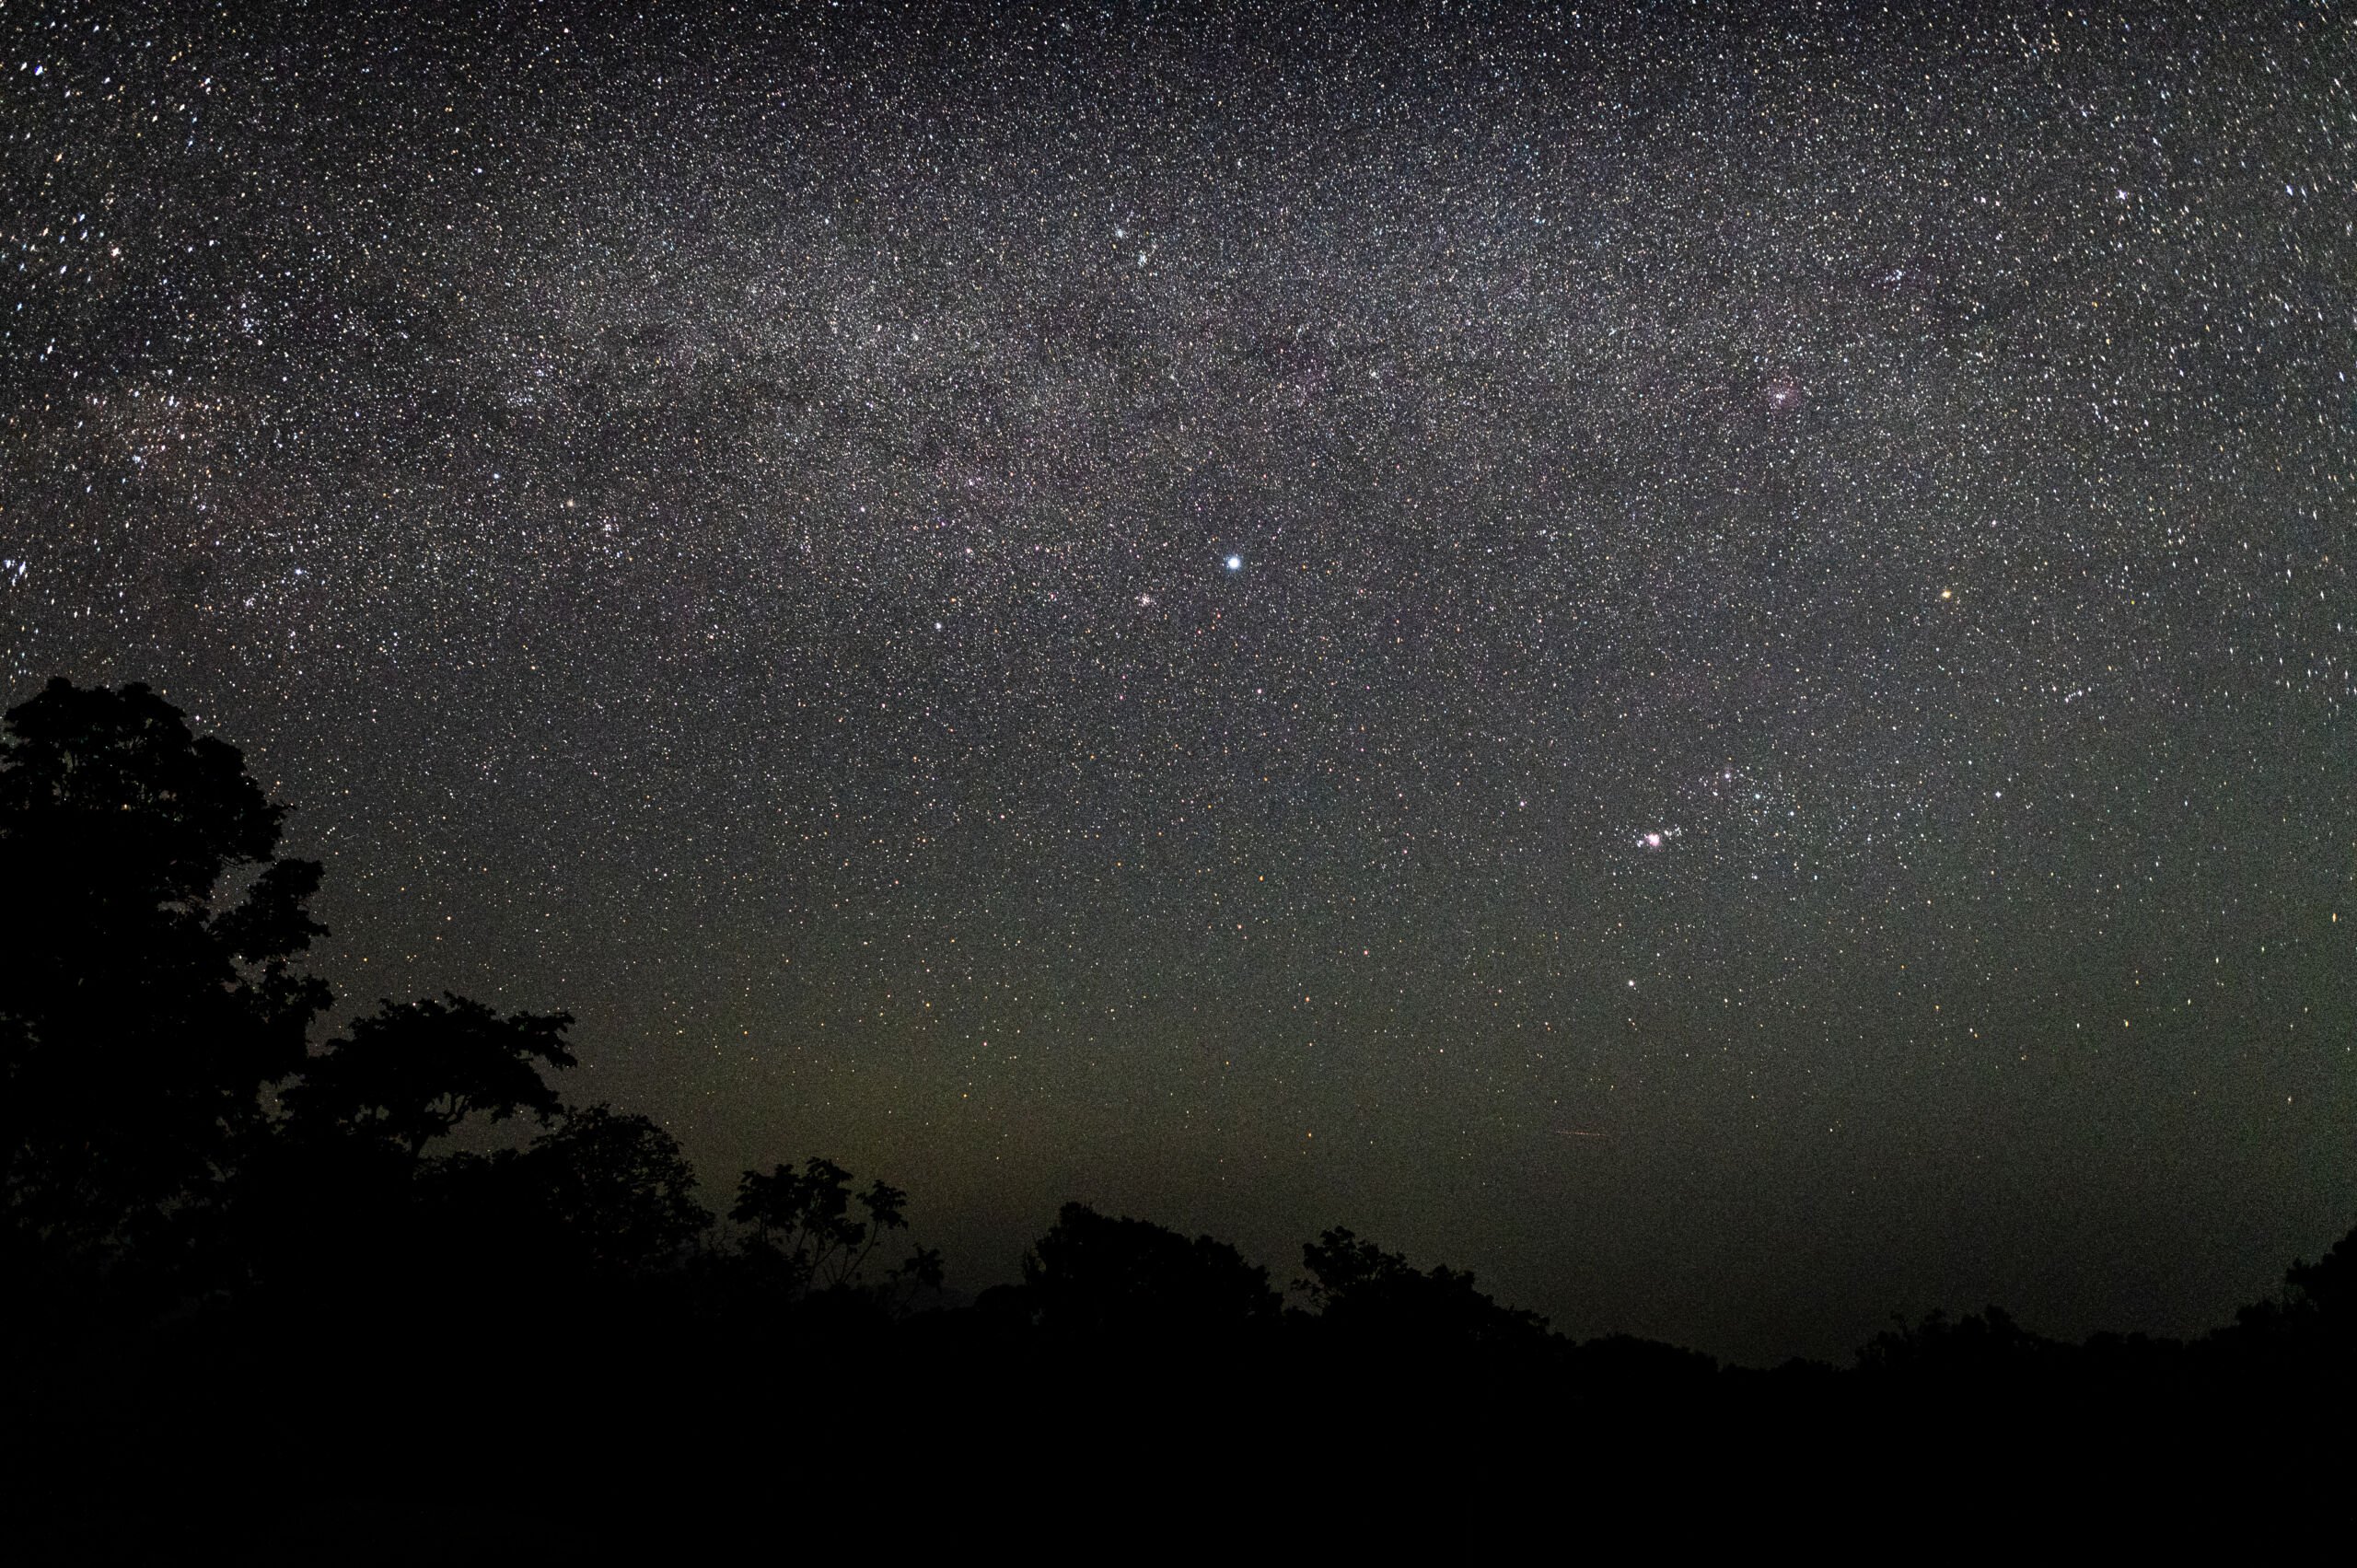 In Search of the Stars: An Artistic Collaboration Between Two Dark Sky Advocates Image